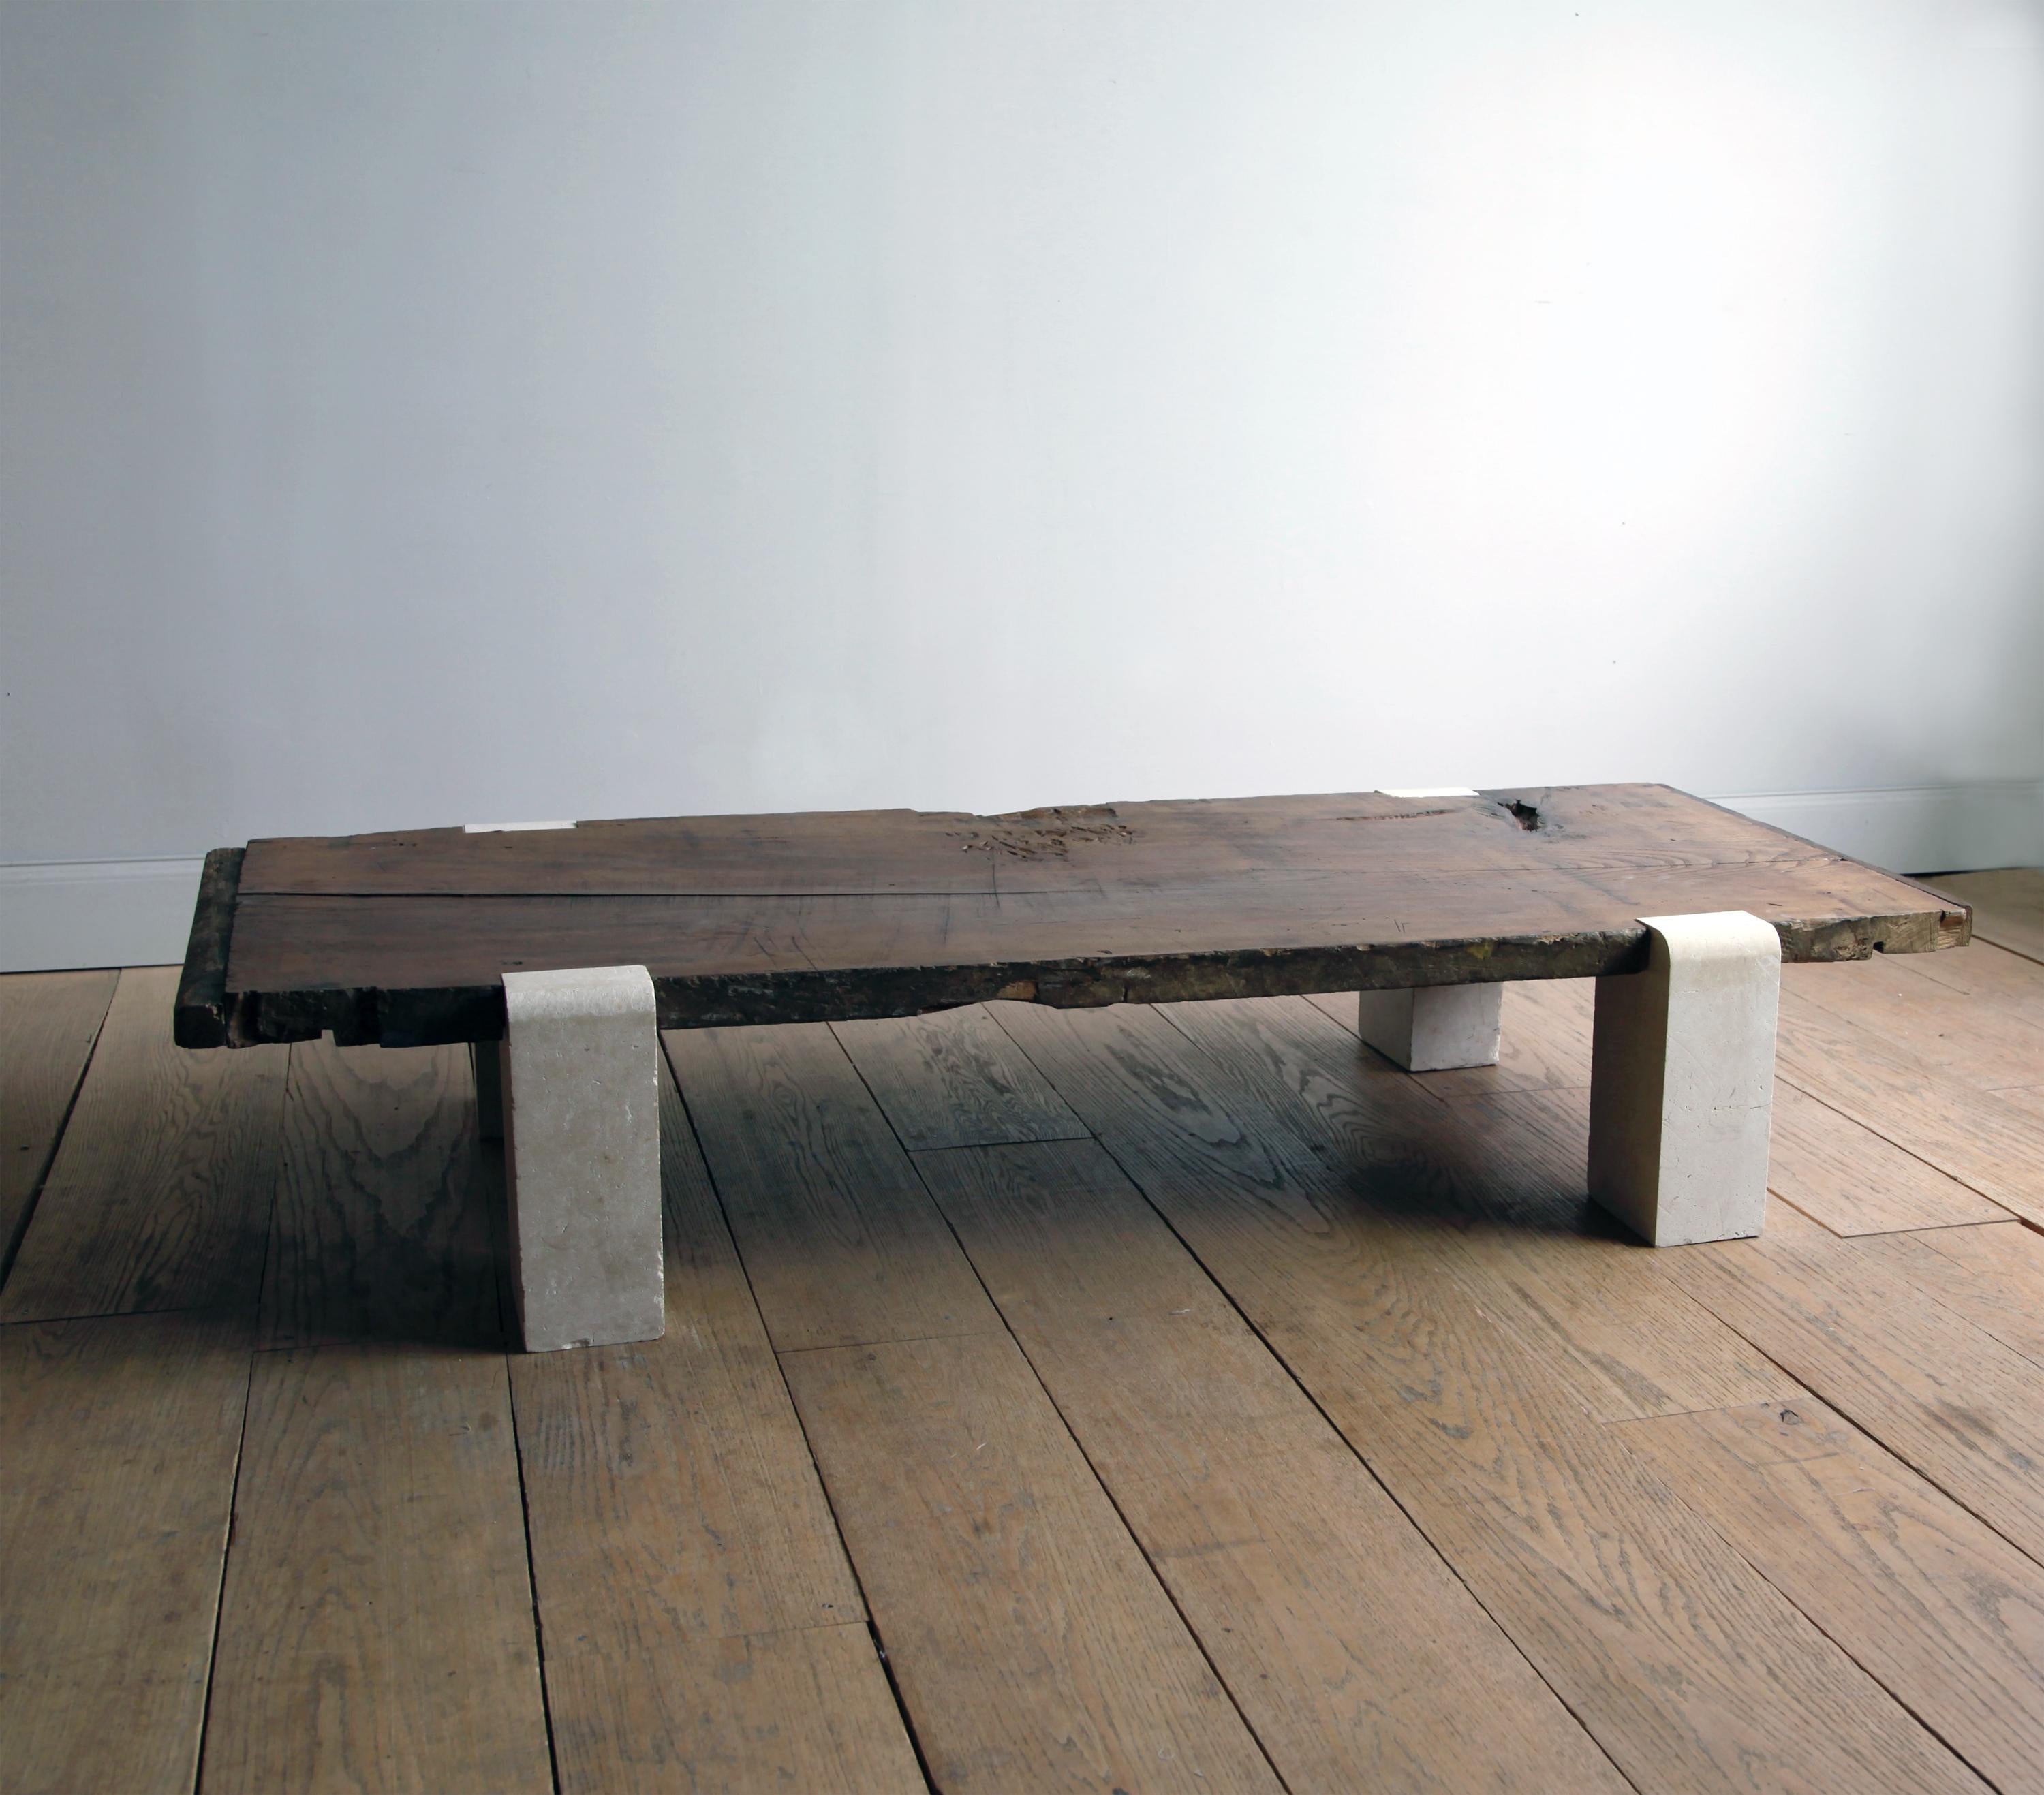 This long, low coffee table can double as a bench or daybed. The wood top is a rare, single slab of antique Belgian old growth walnut that expresses not only its organic essence but the years of use which have tempered its surface. It sits securely